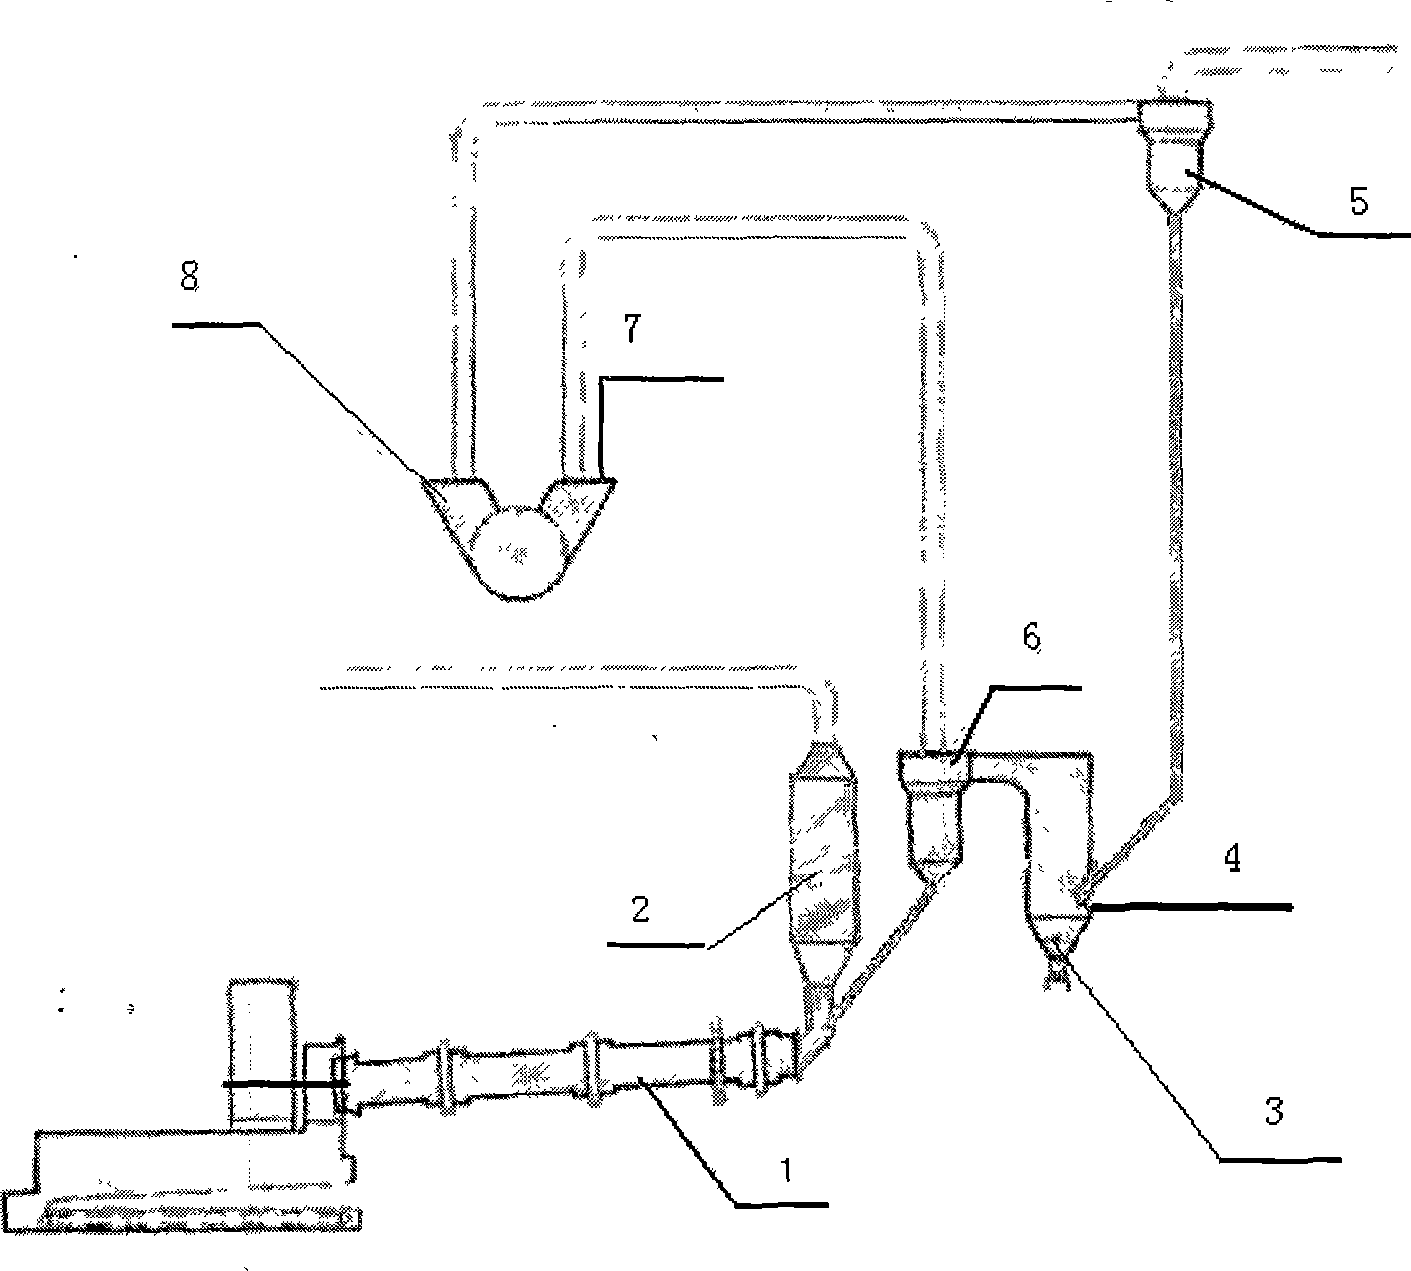 Method for improving SO2 concentration in acid making technique with decomposition of calcium sulphate